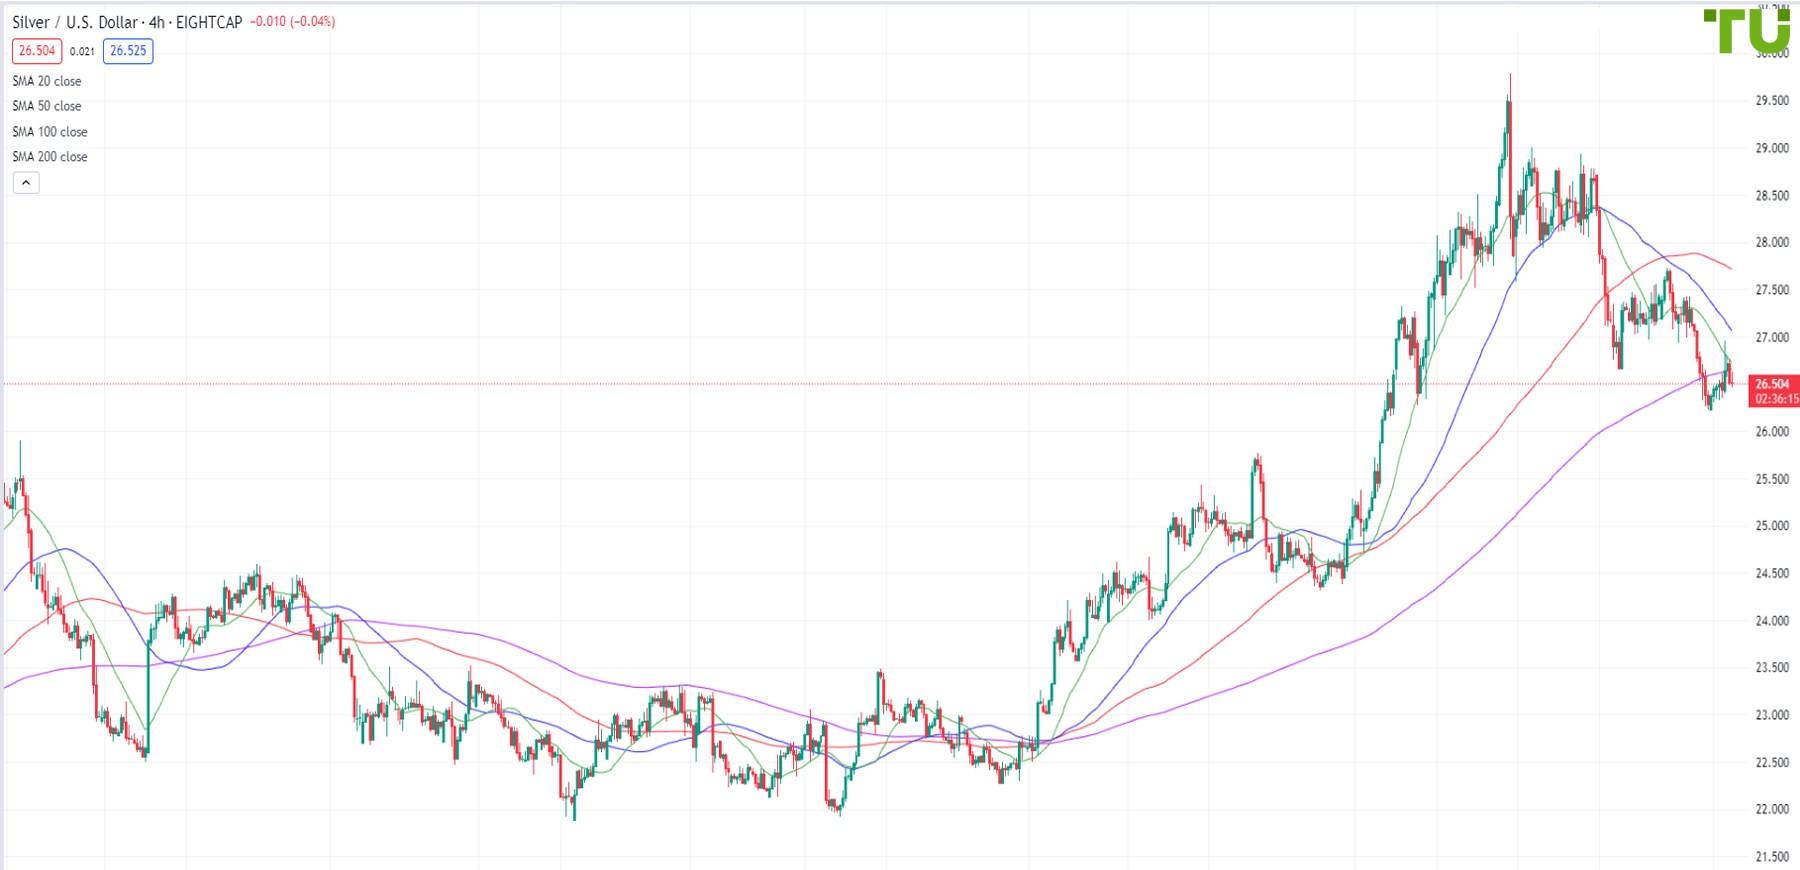 XAG/USD is back under pressure